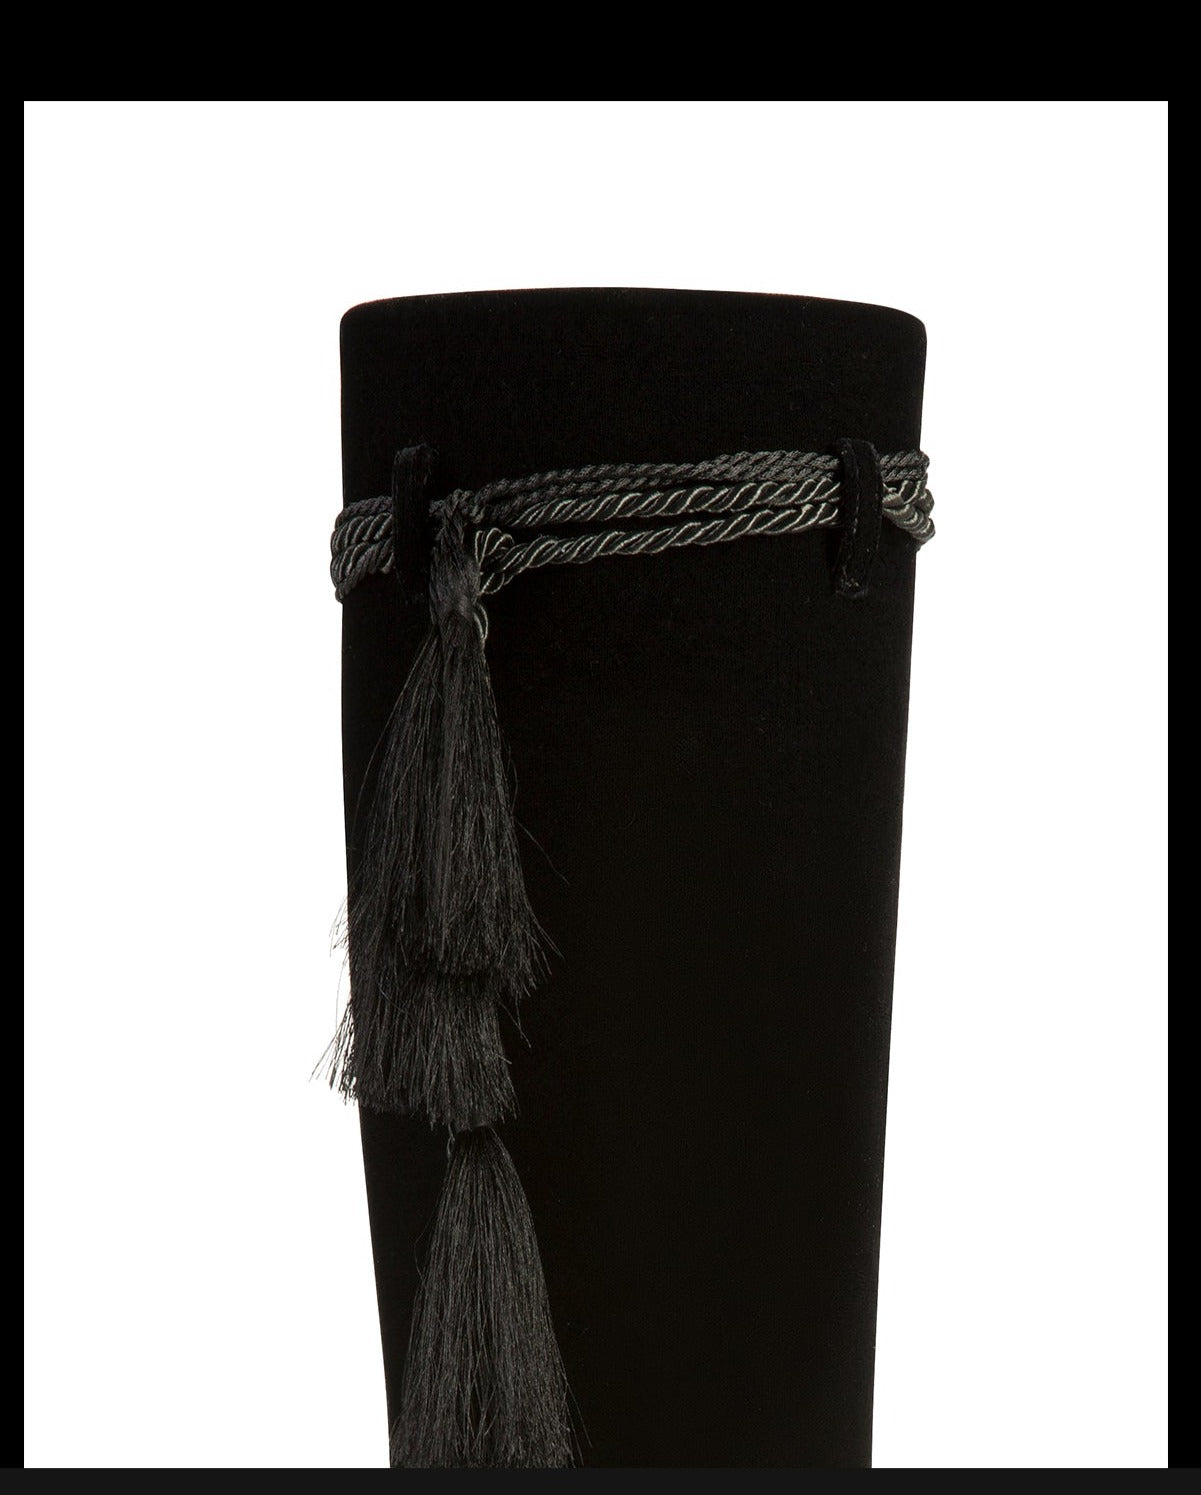 Fabfei Fall/Winter black suede pointed stiletto red fringed knee-length boots - Karai